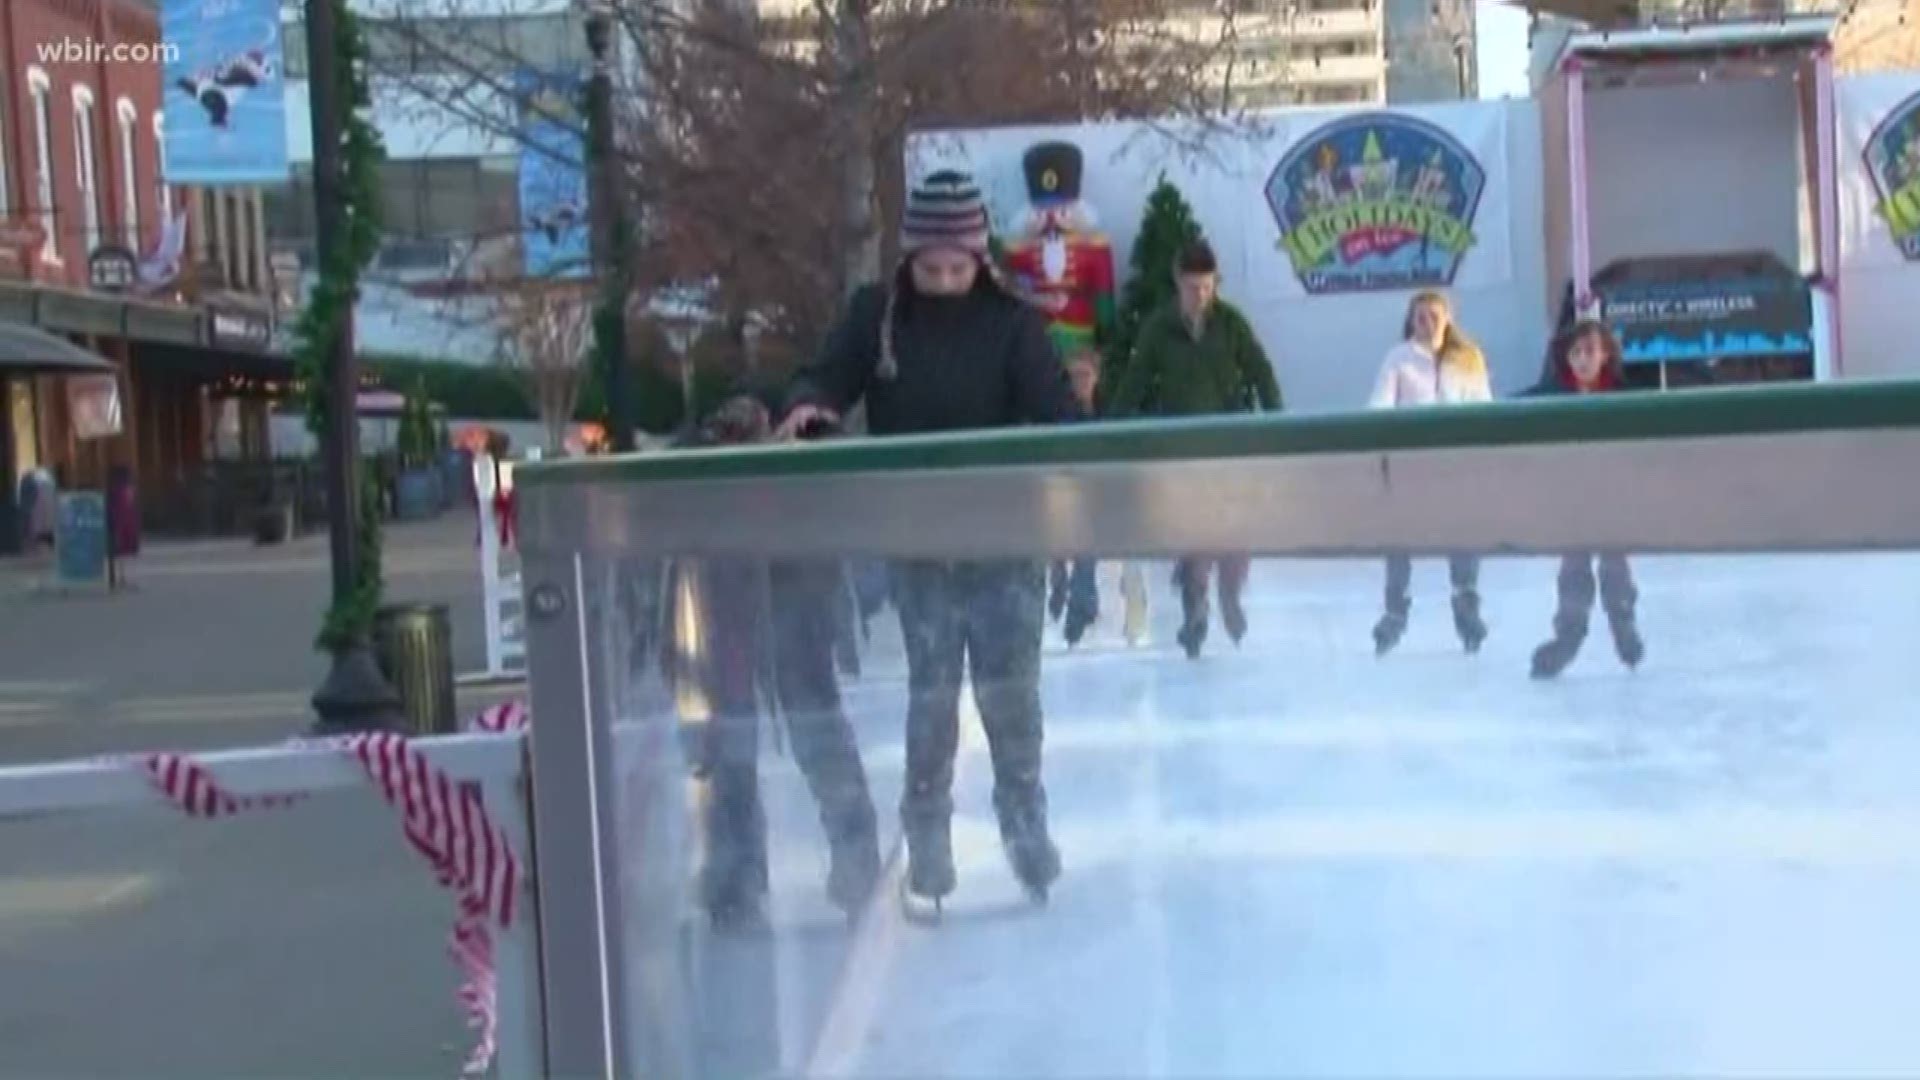 Ice skating continues at Knoxville's Market Square thanks to the Holidays on Ice skating rink
December 11, 2017-4pm